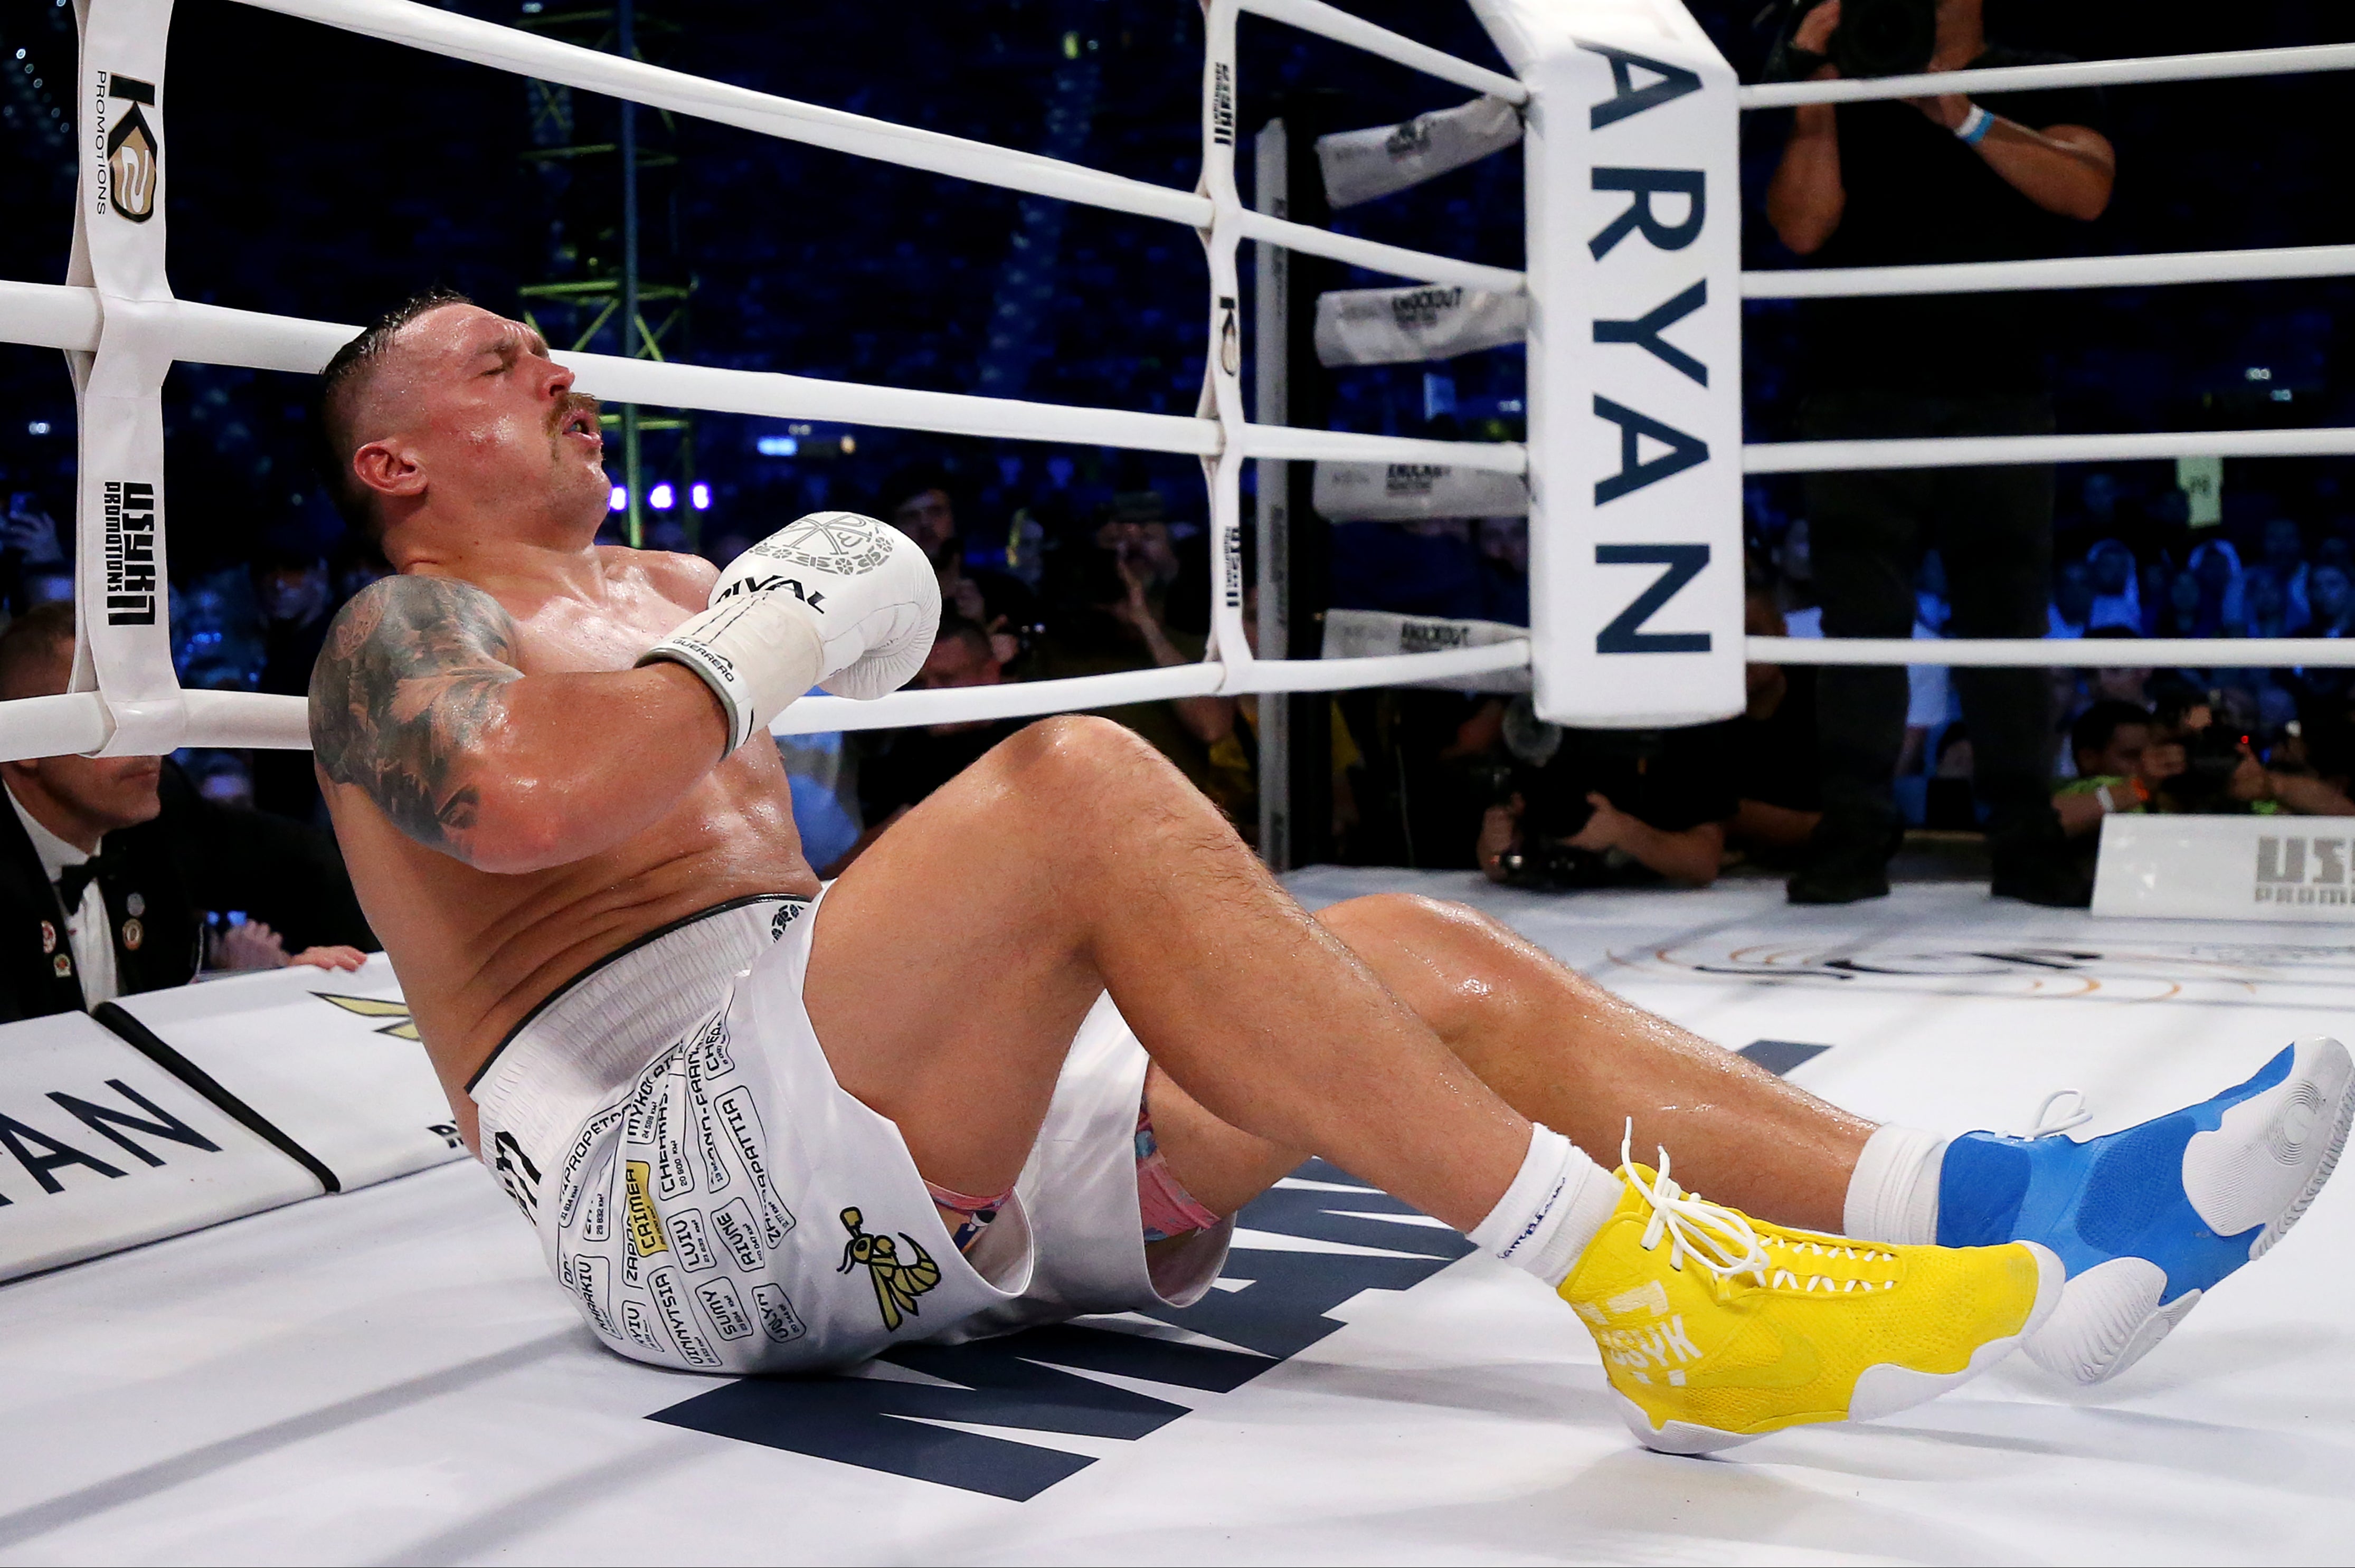 Usyk survived a controversial low blow against Daniel Dubois in August